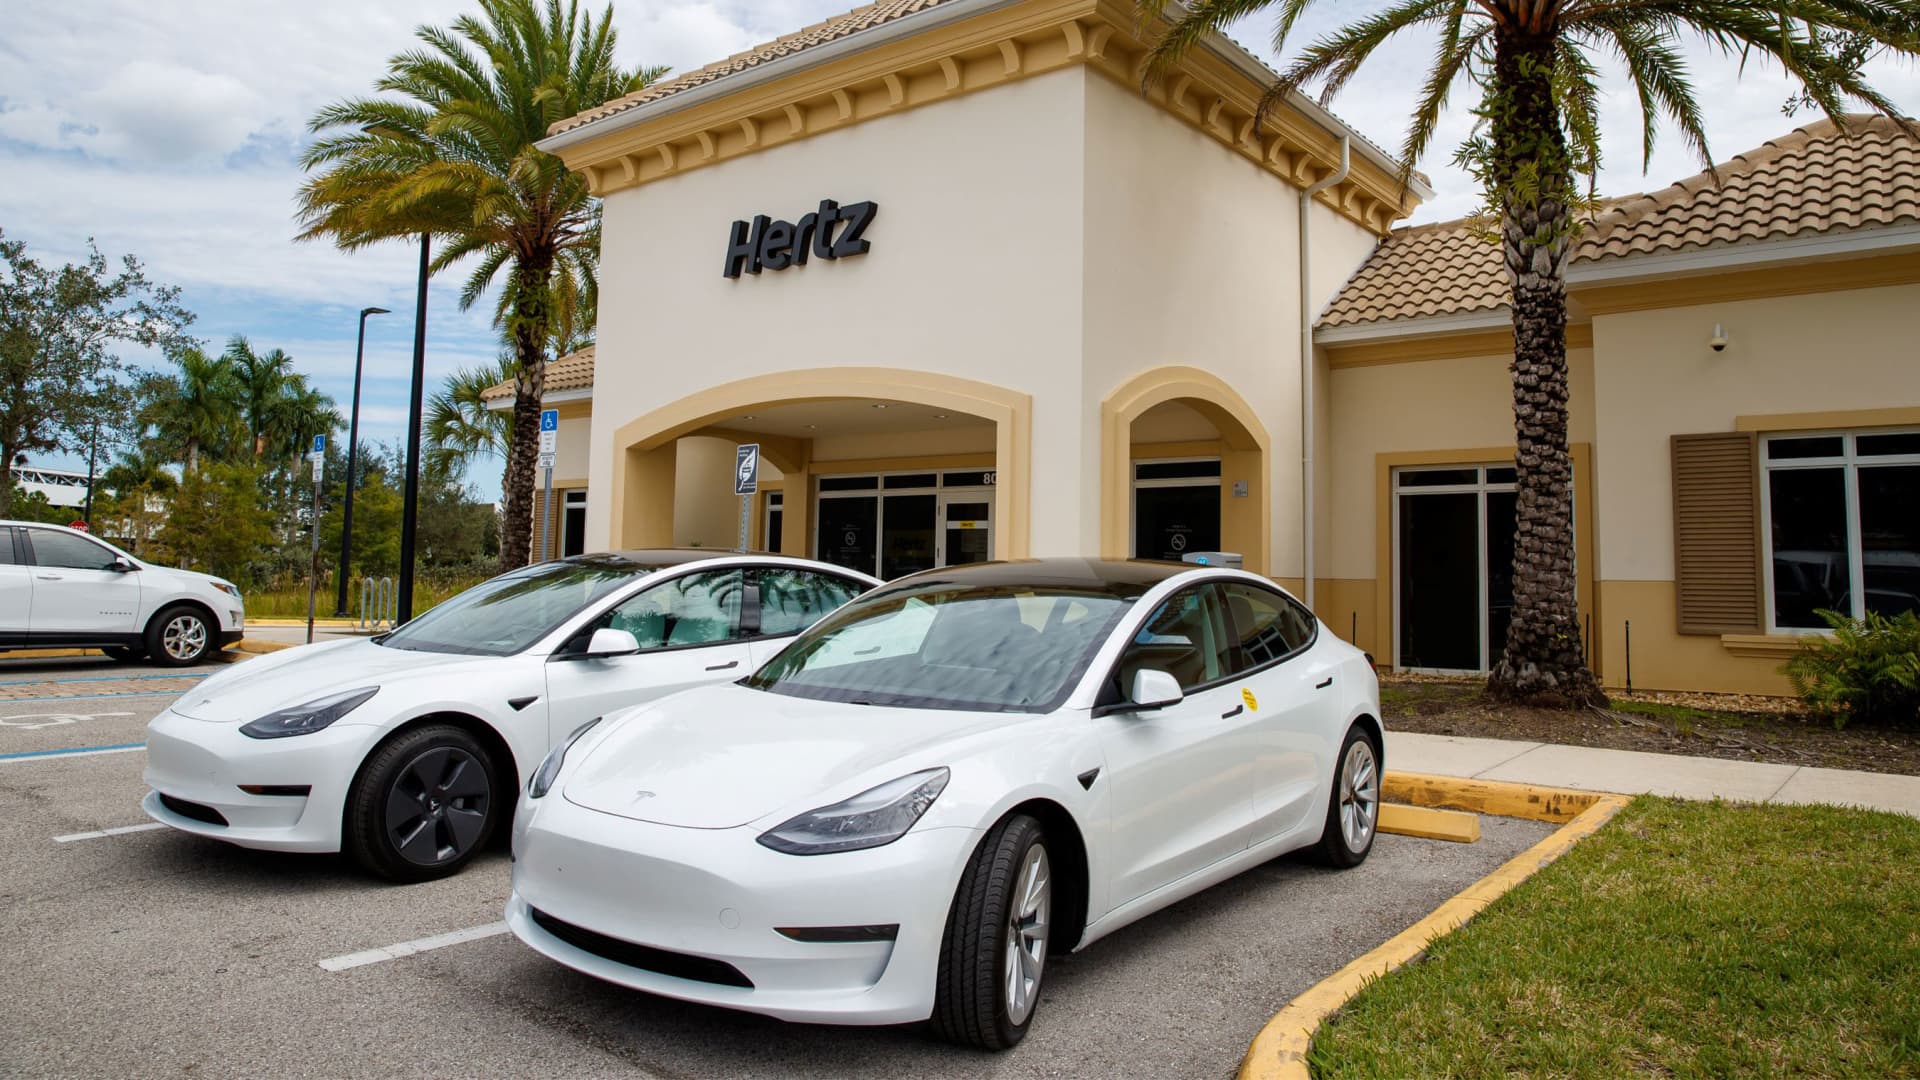 Publish-Covid, post-bankruptcy Hertz is all-in on electrical, with big implications for the EV, auto and rideshare market